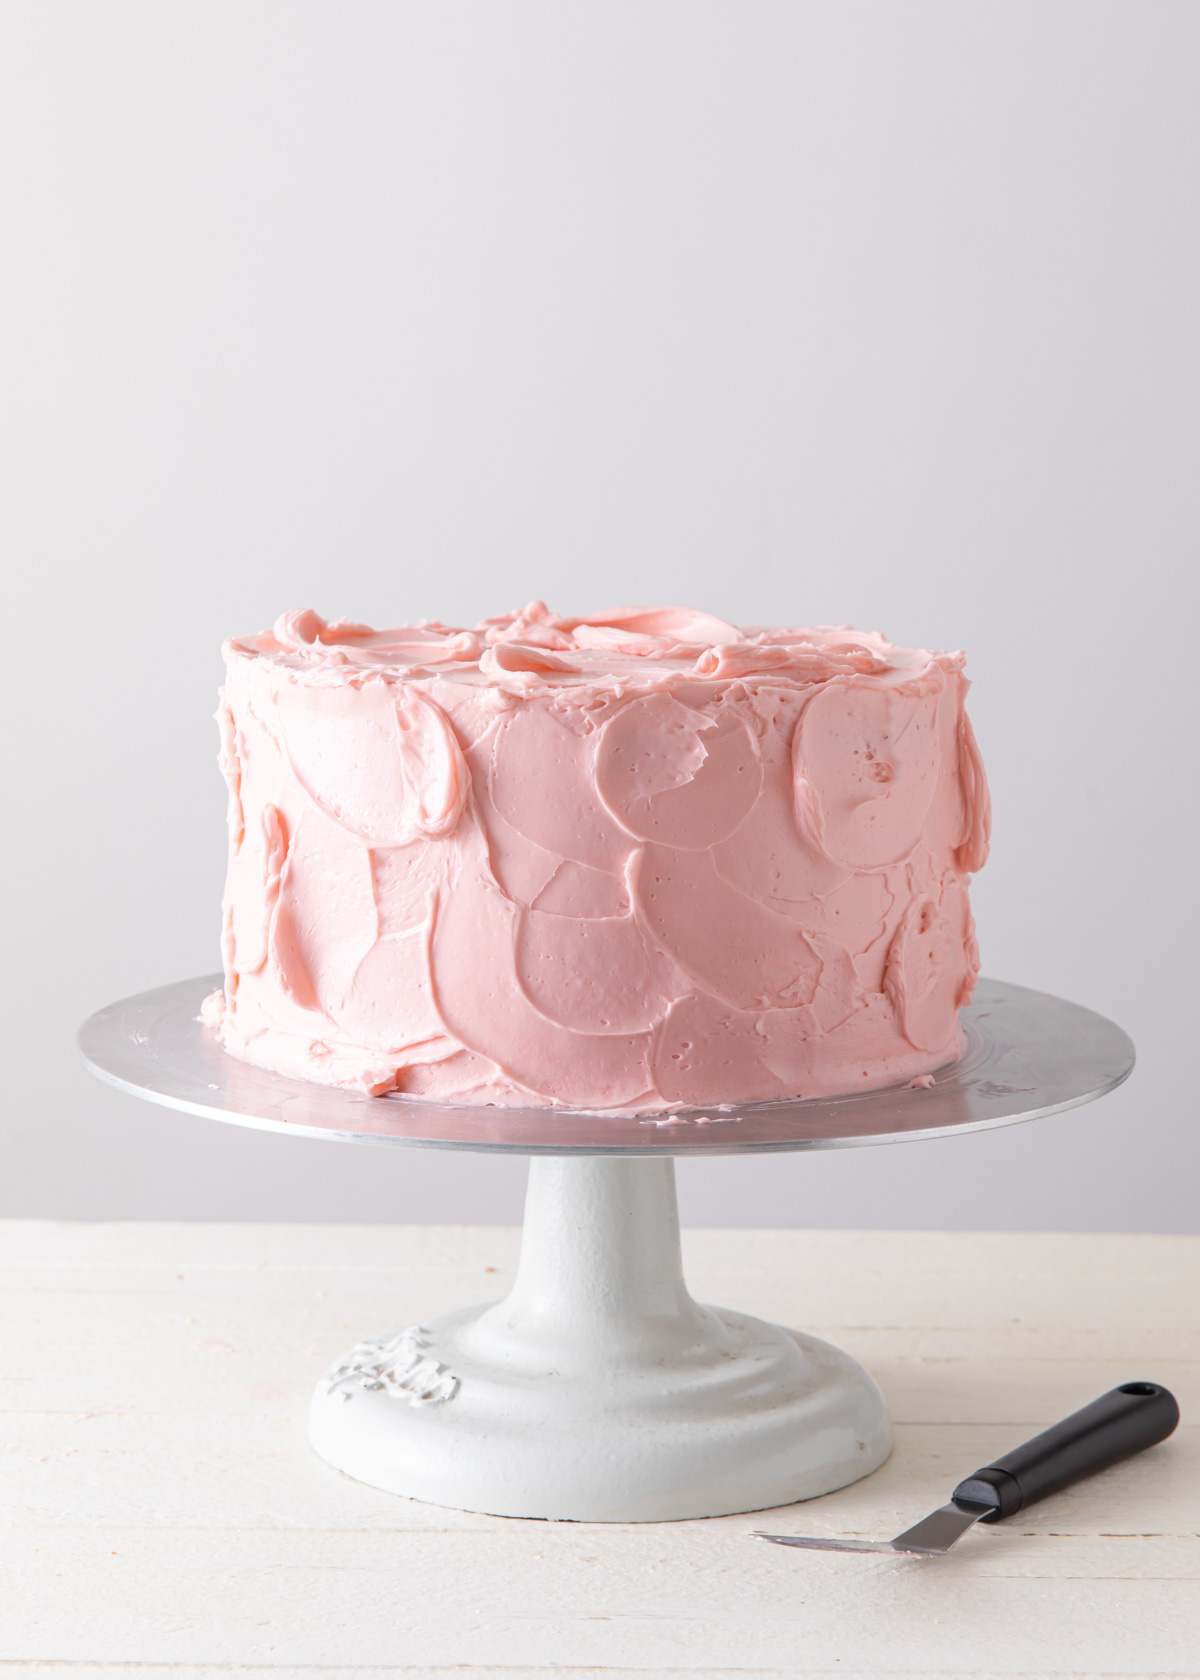 I. Introduction to Textured Buttercream Designs